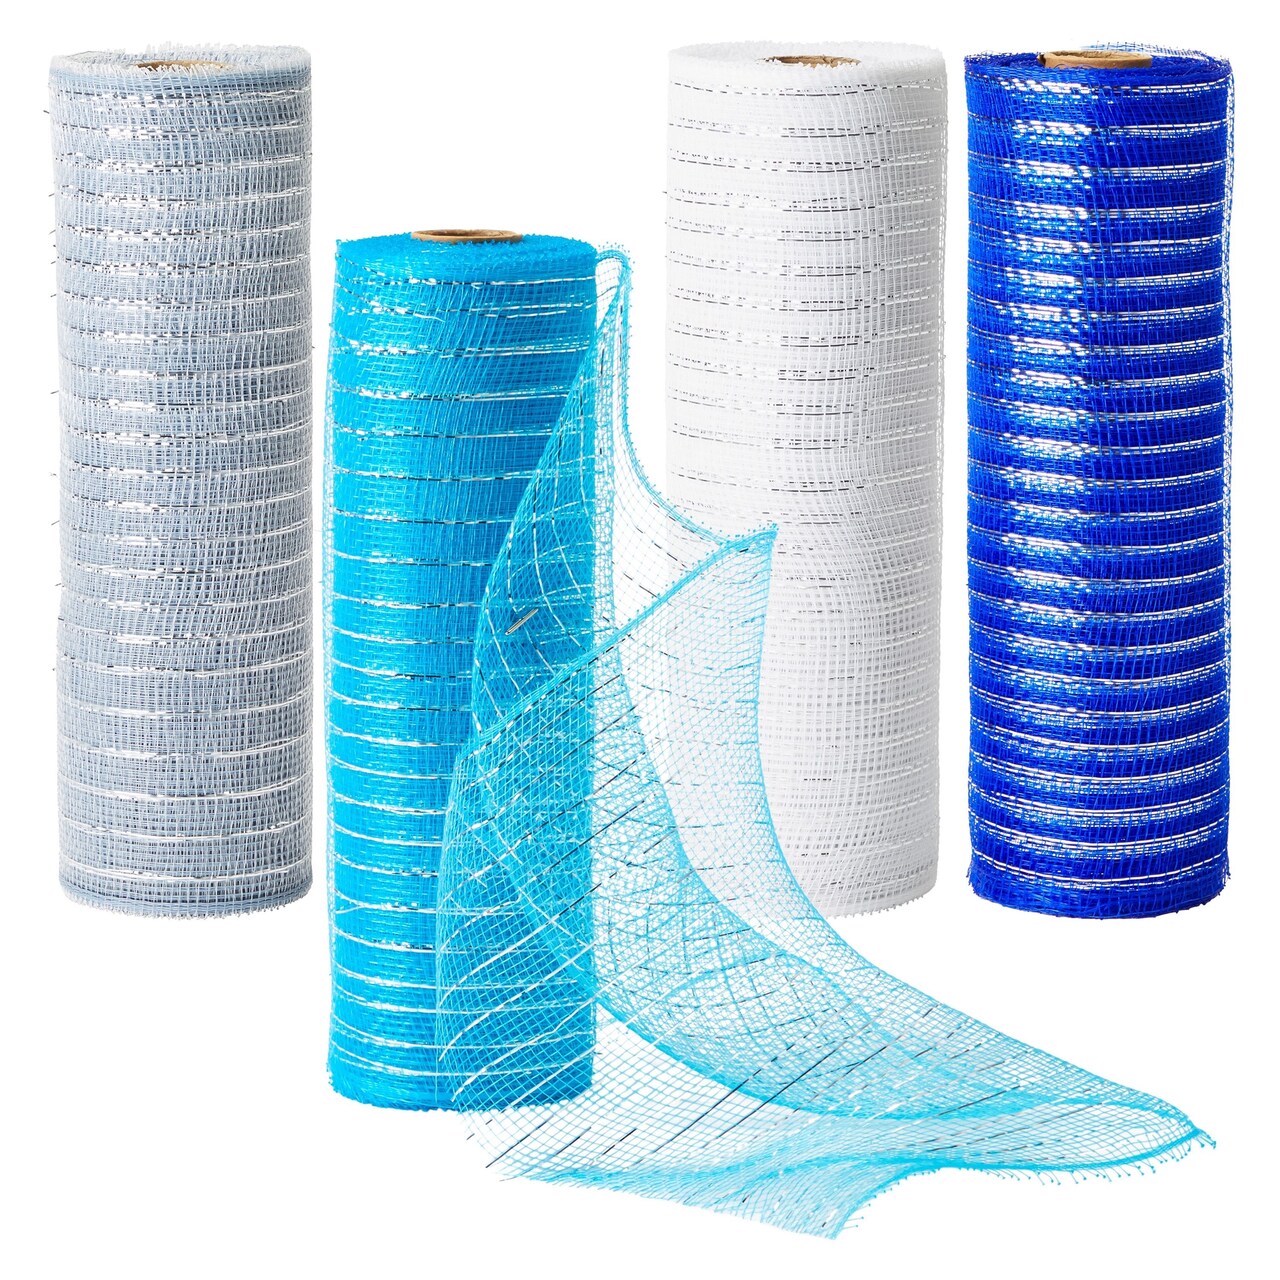 4 Pack 10 Inch Deco Mesh Ribbon Rolls for Easter Wreath, Craft Mesh,  Metallic Poly Burlap in Blue, Silver, White, and Royal Blue, 10 In x 30 Ft  (10